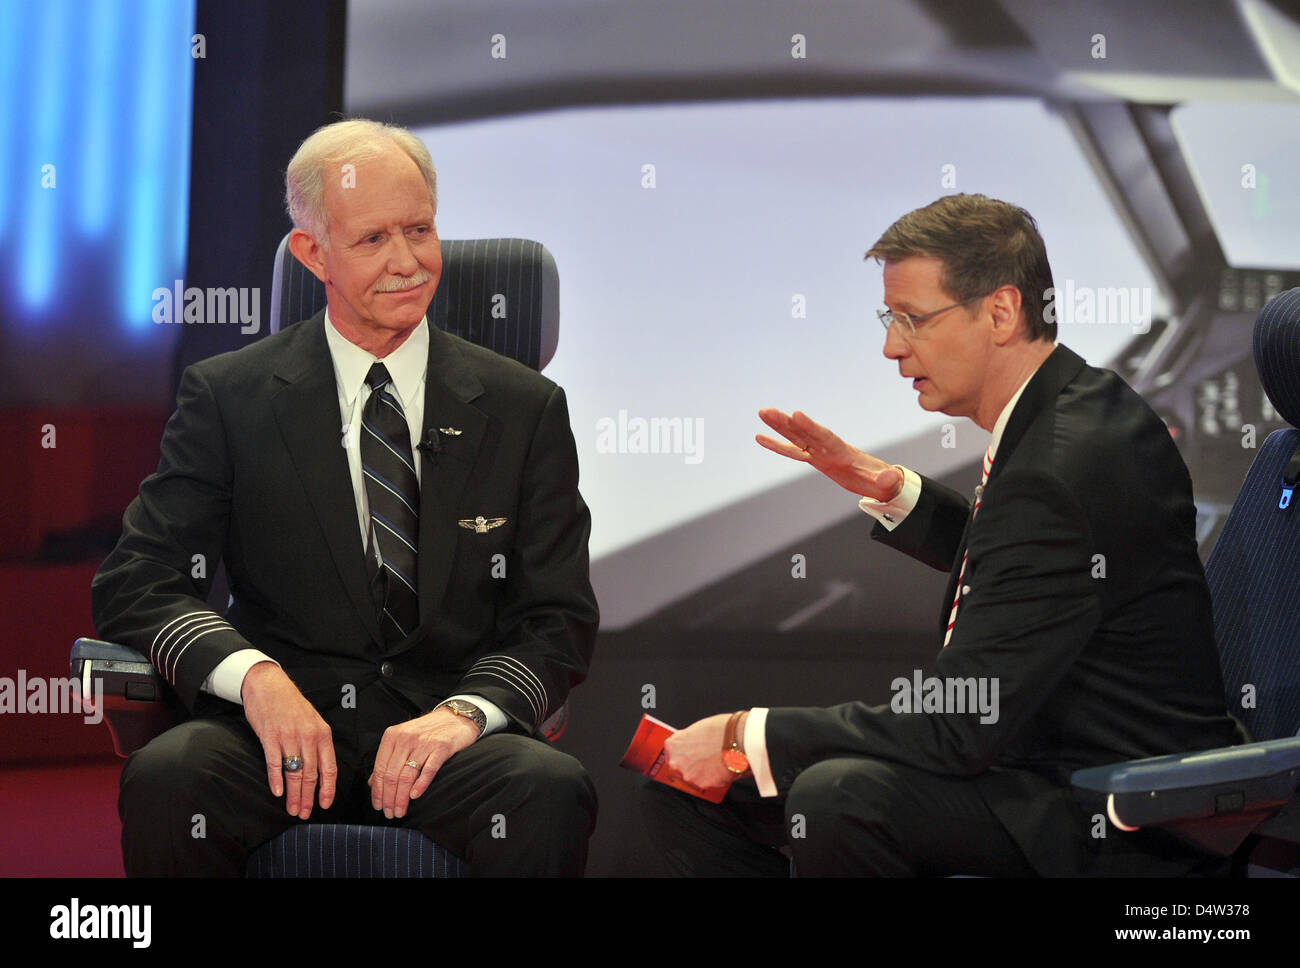 Chesley B. Sullenberger III (L), pilot of US Airways and 'hero of the Hudson', is a guest at the German television year end retrospective '2009! People, Pictures, Emotions' ('2009! Menschen, Bilder, Emotionen') hosted by Guenther Jauch in Cologne, Germany, 13 December 2009. Sullenberger had saved the lives of 155 passengers in an emergency ditching on the Hudson River in New York,  Stock Photo